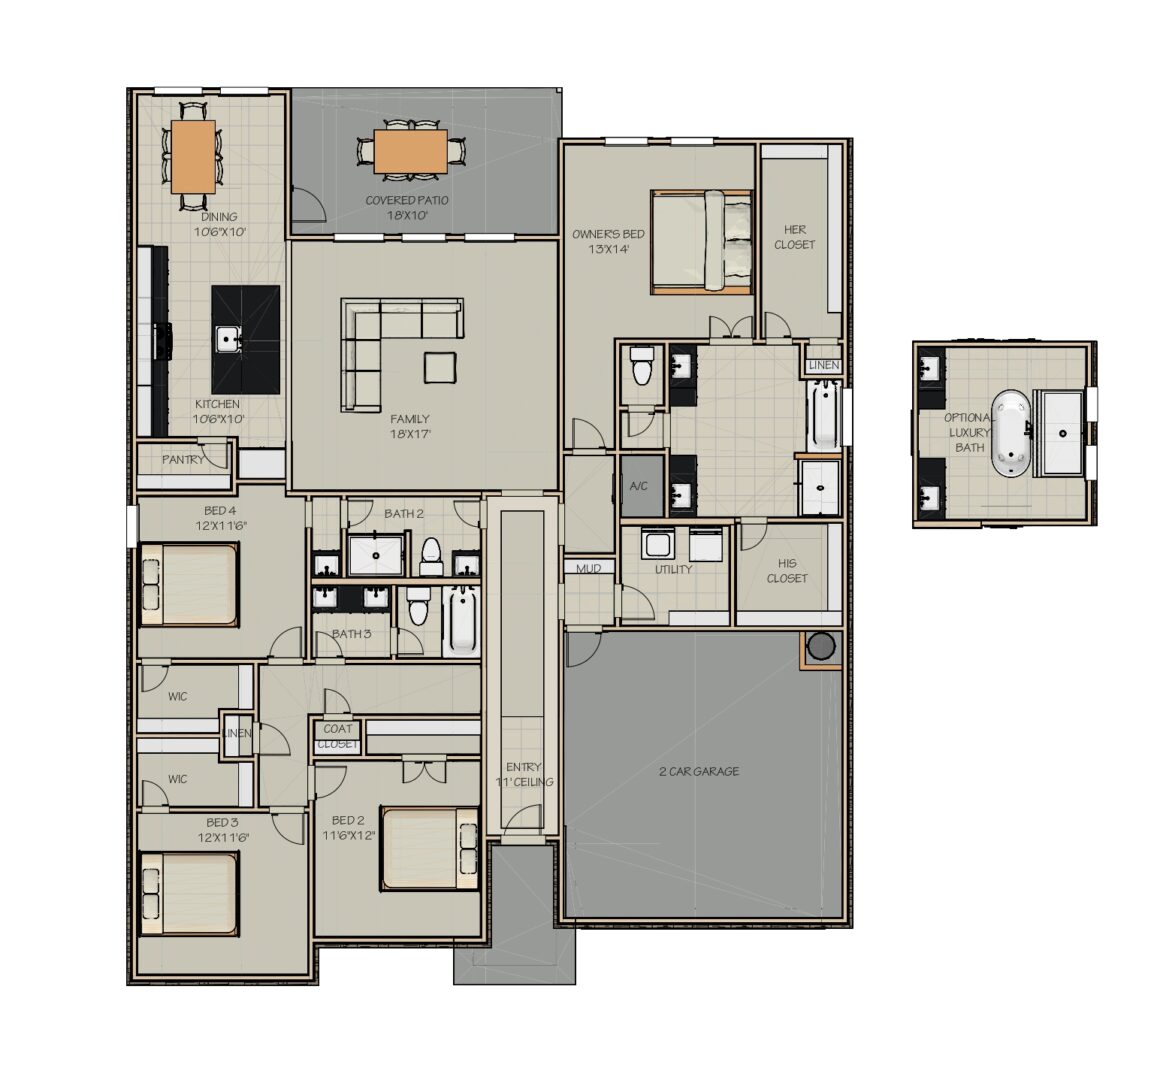 A floor plan for a three bedroom home.